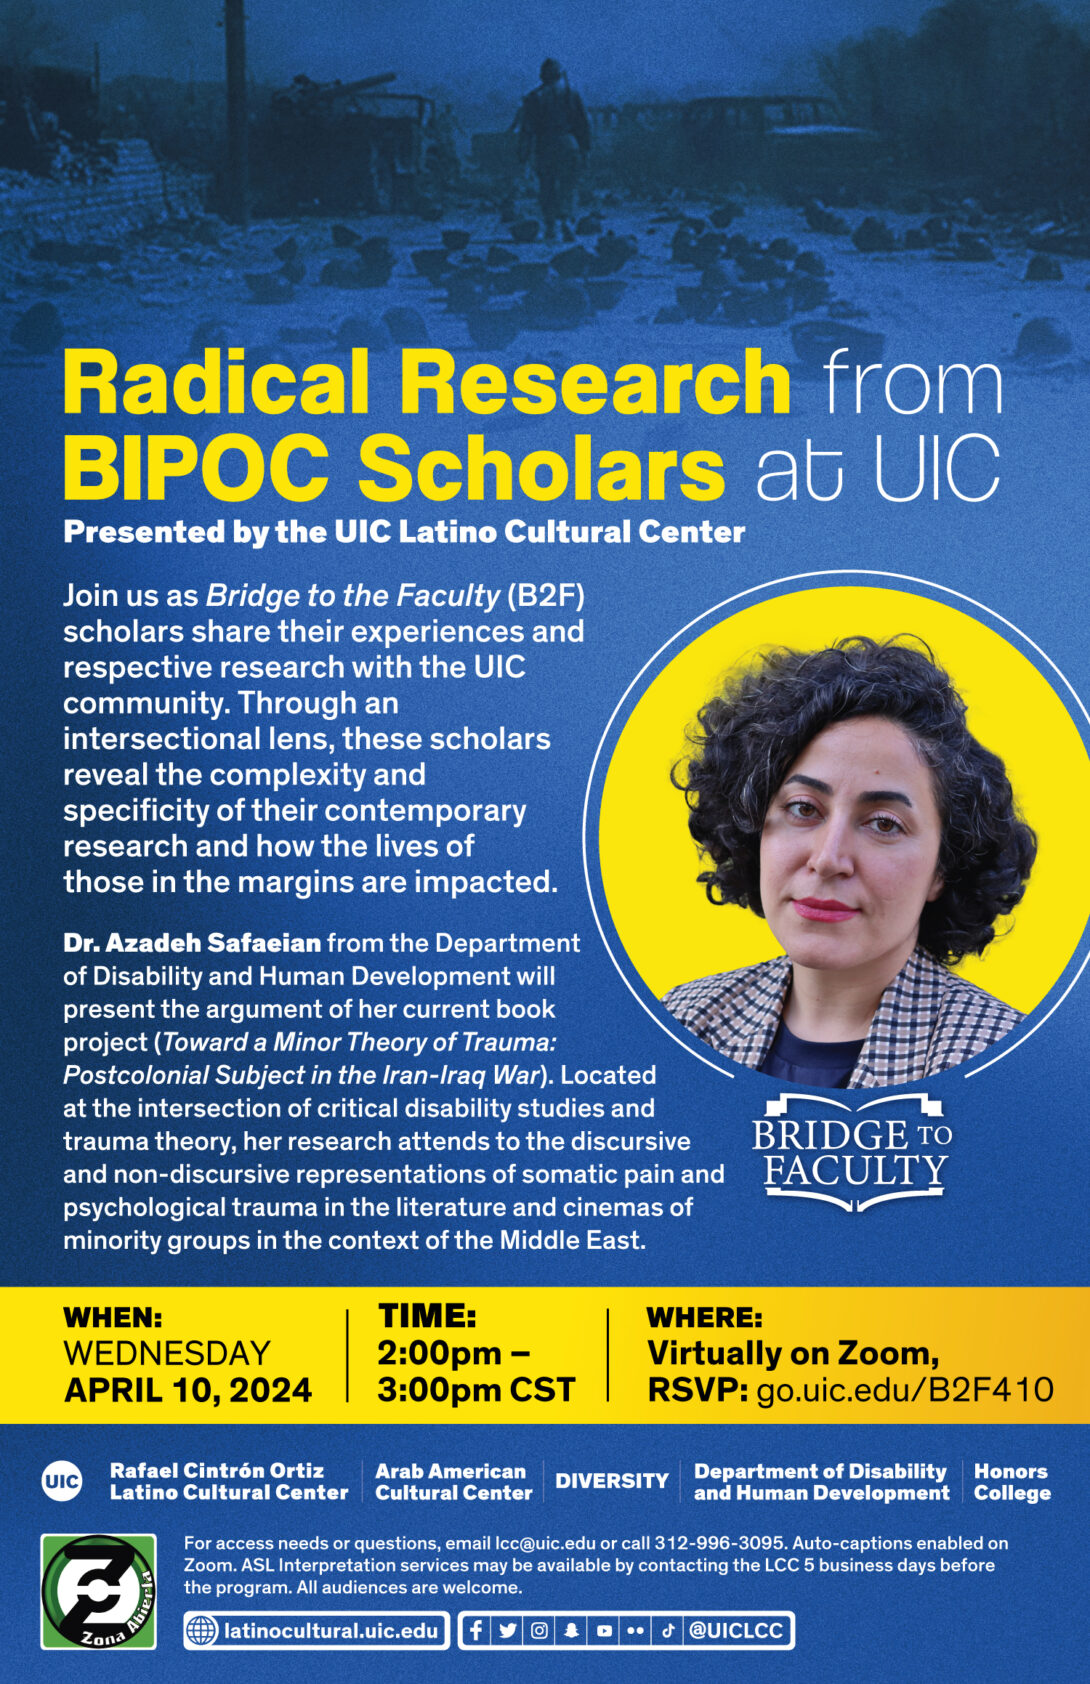 Dr. Safaeian appears to the right of the blue poster inside a yellow circle. She is wearing a black and white patterned jacket and has short black curly hair inches over her shoulder and red lipstick.